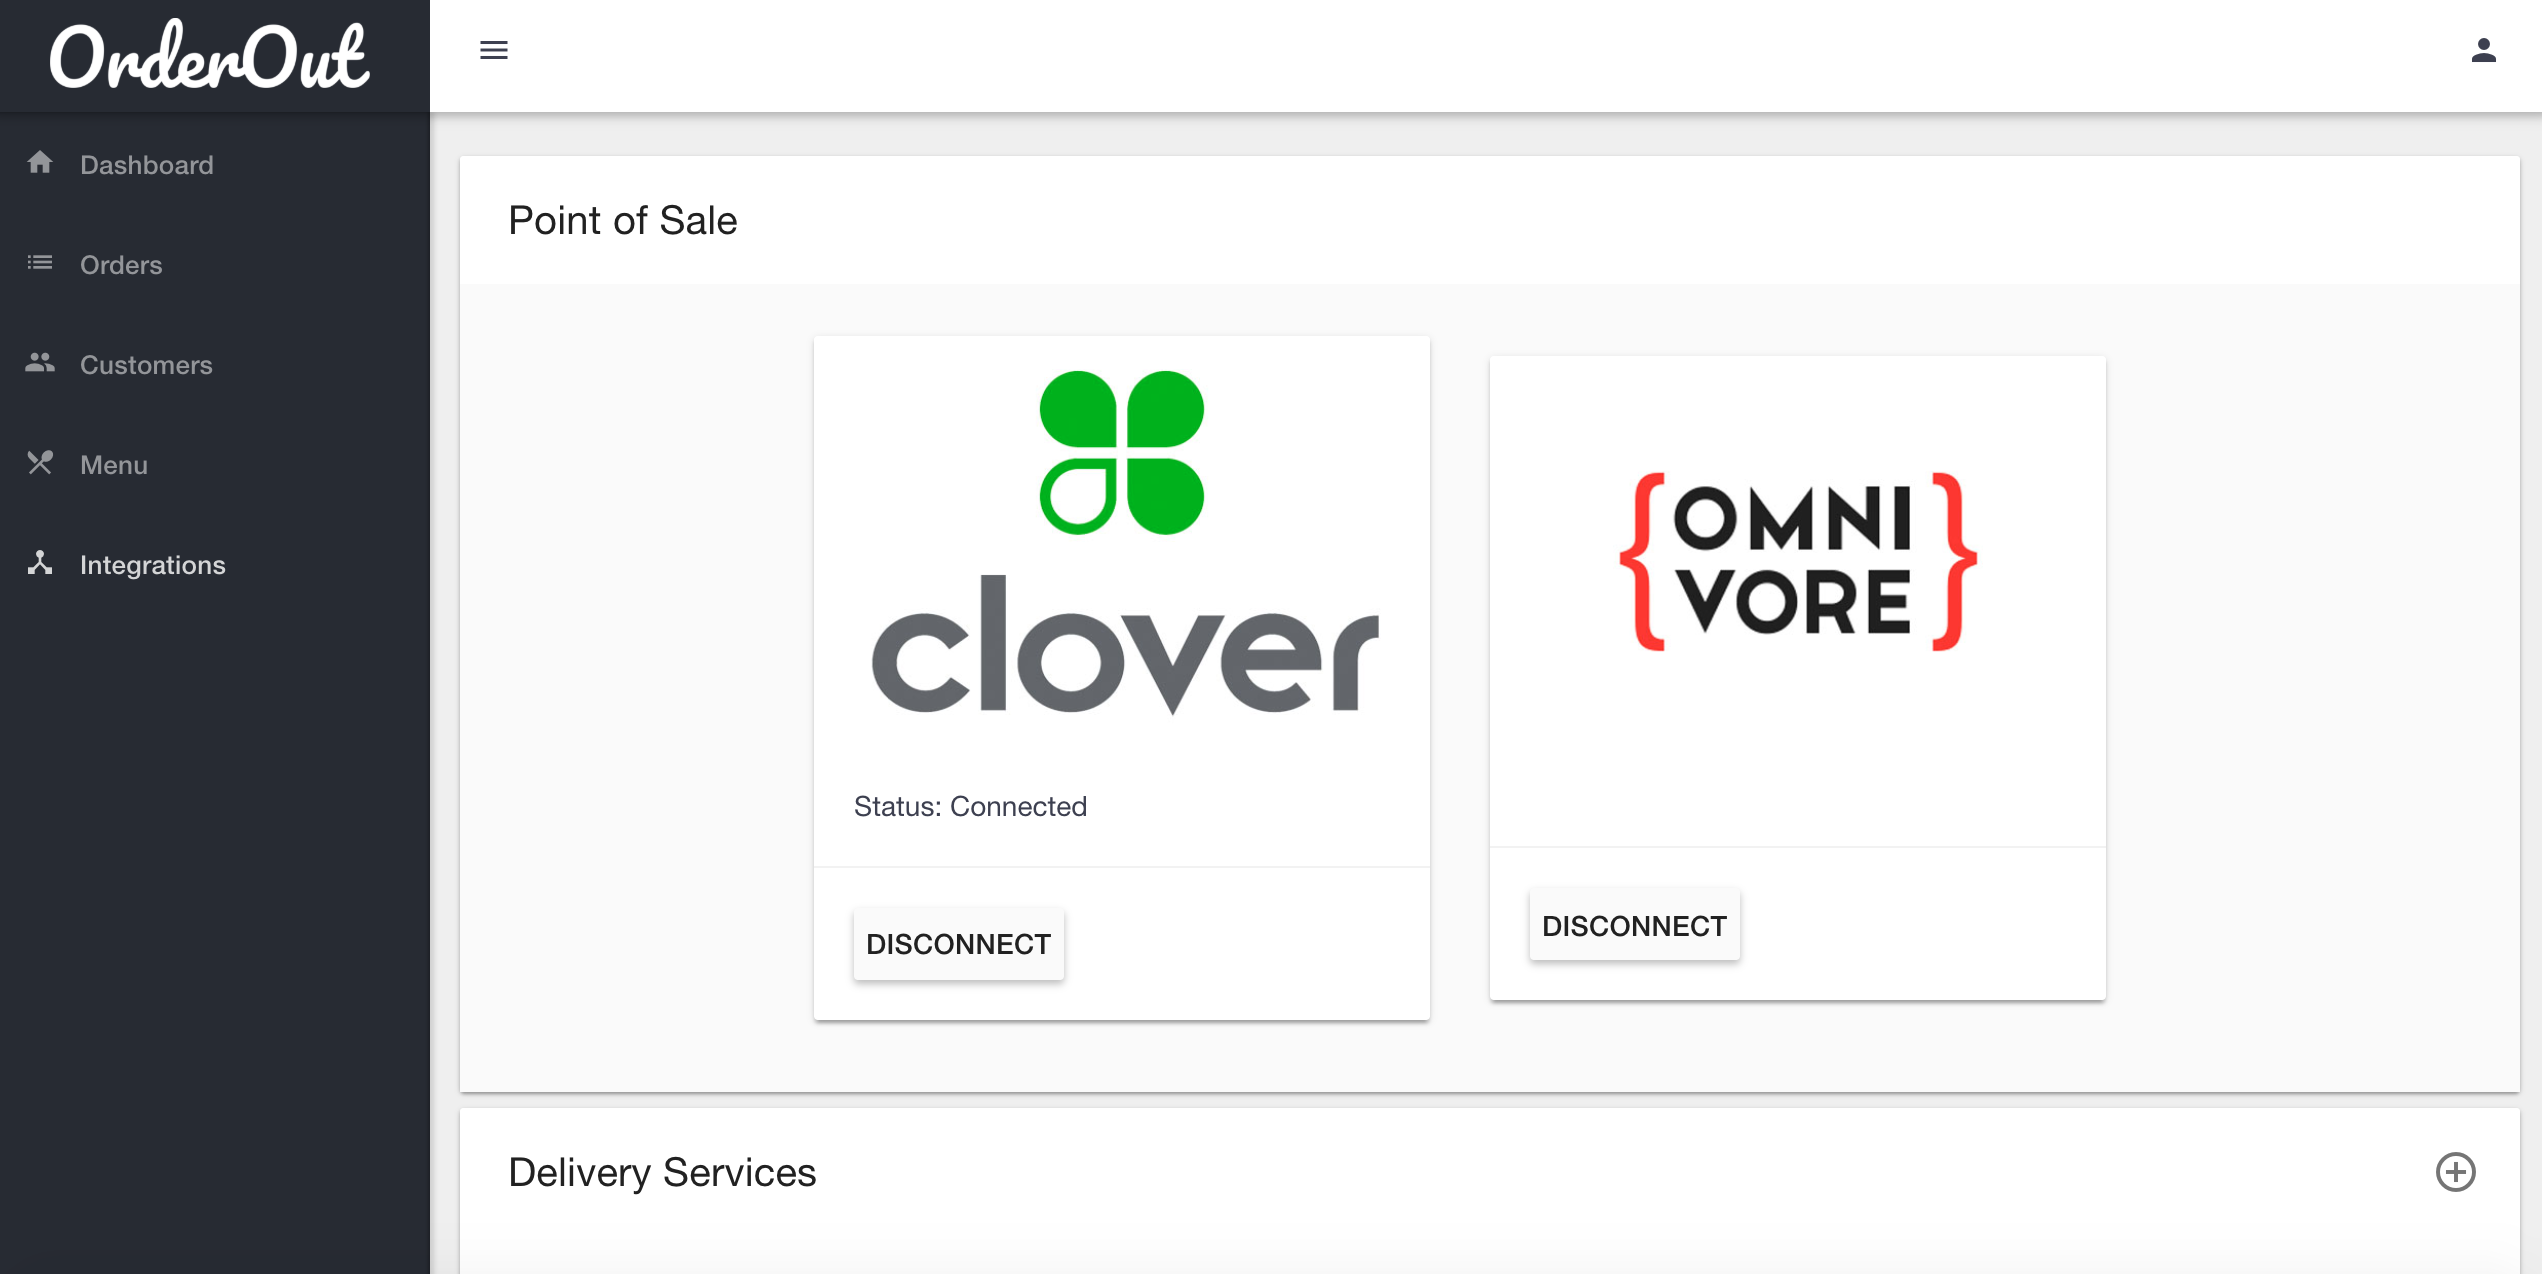 Point of sale integrations